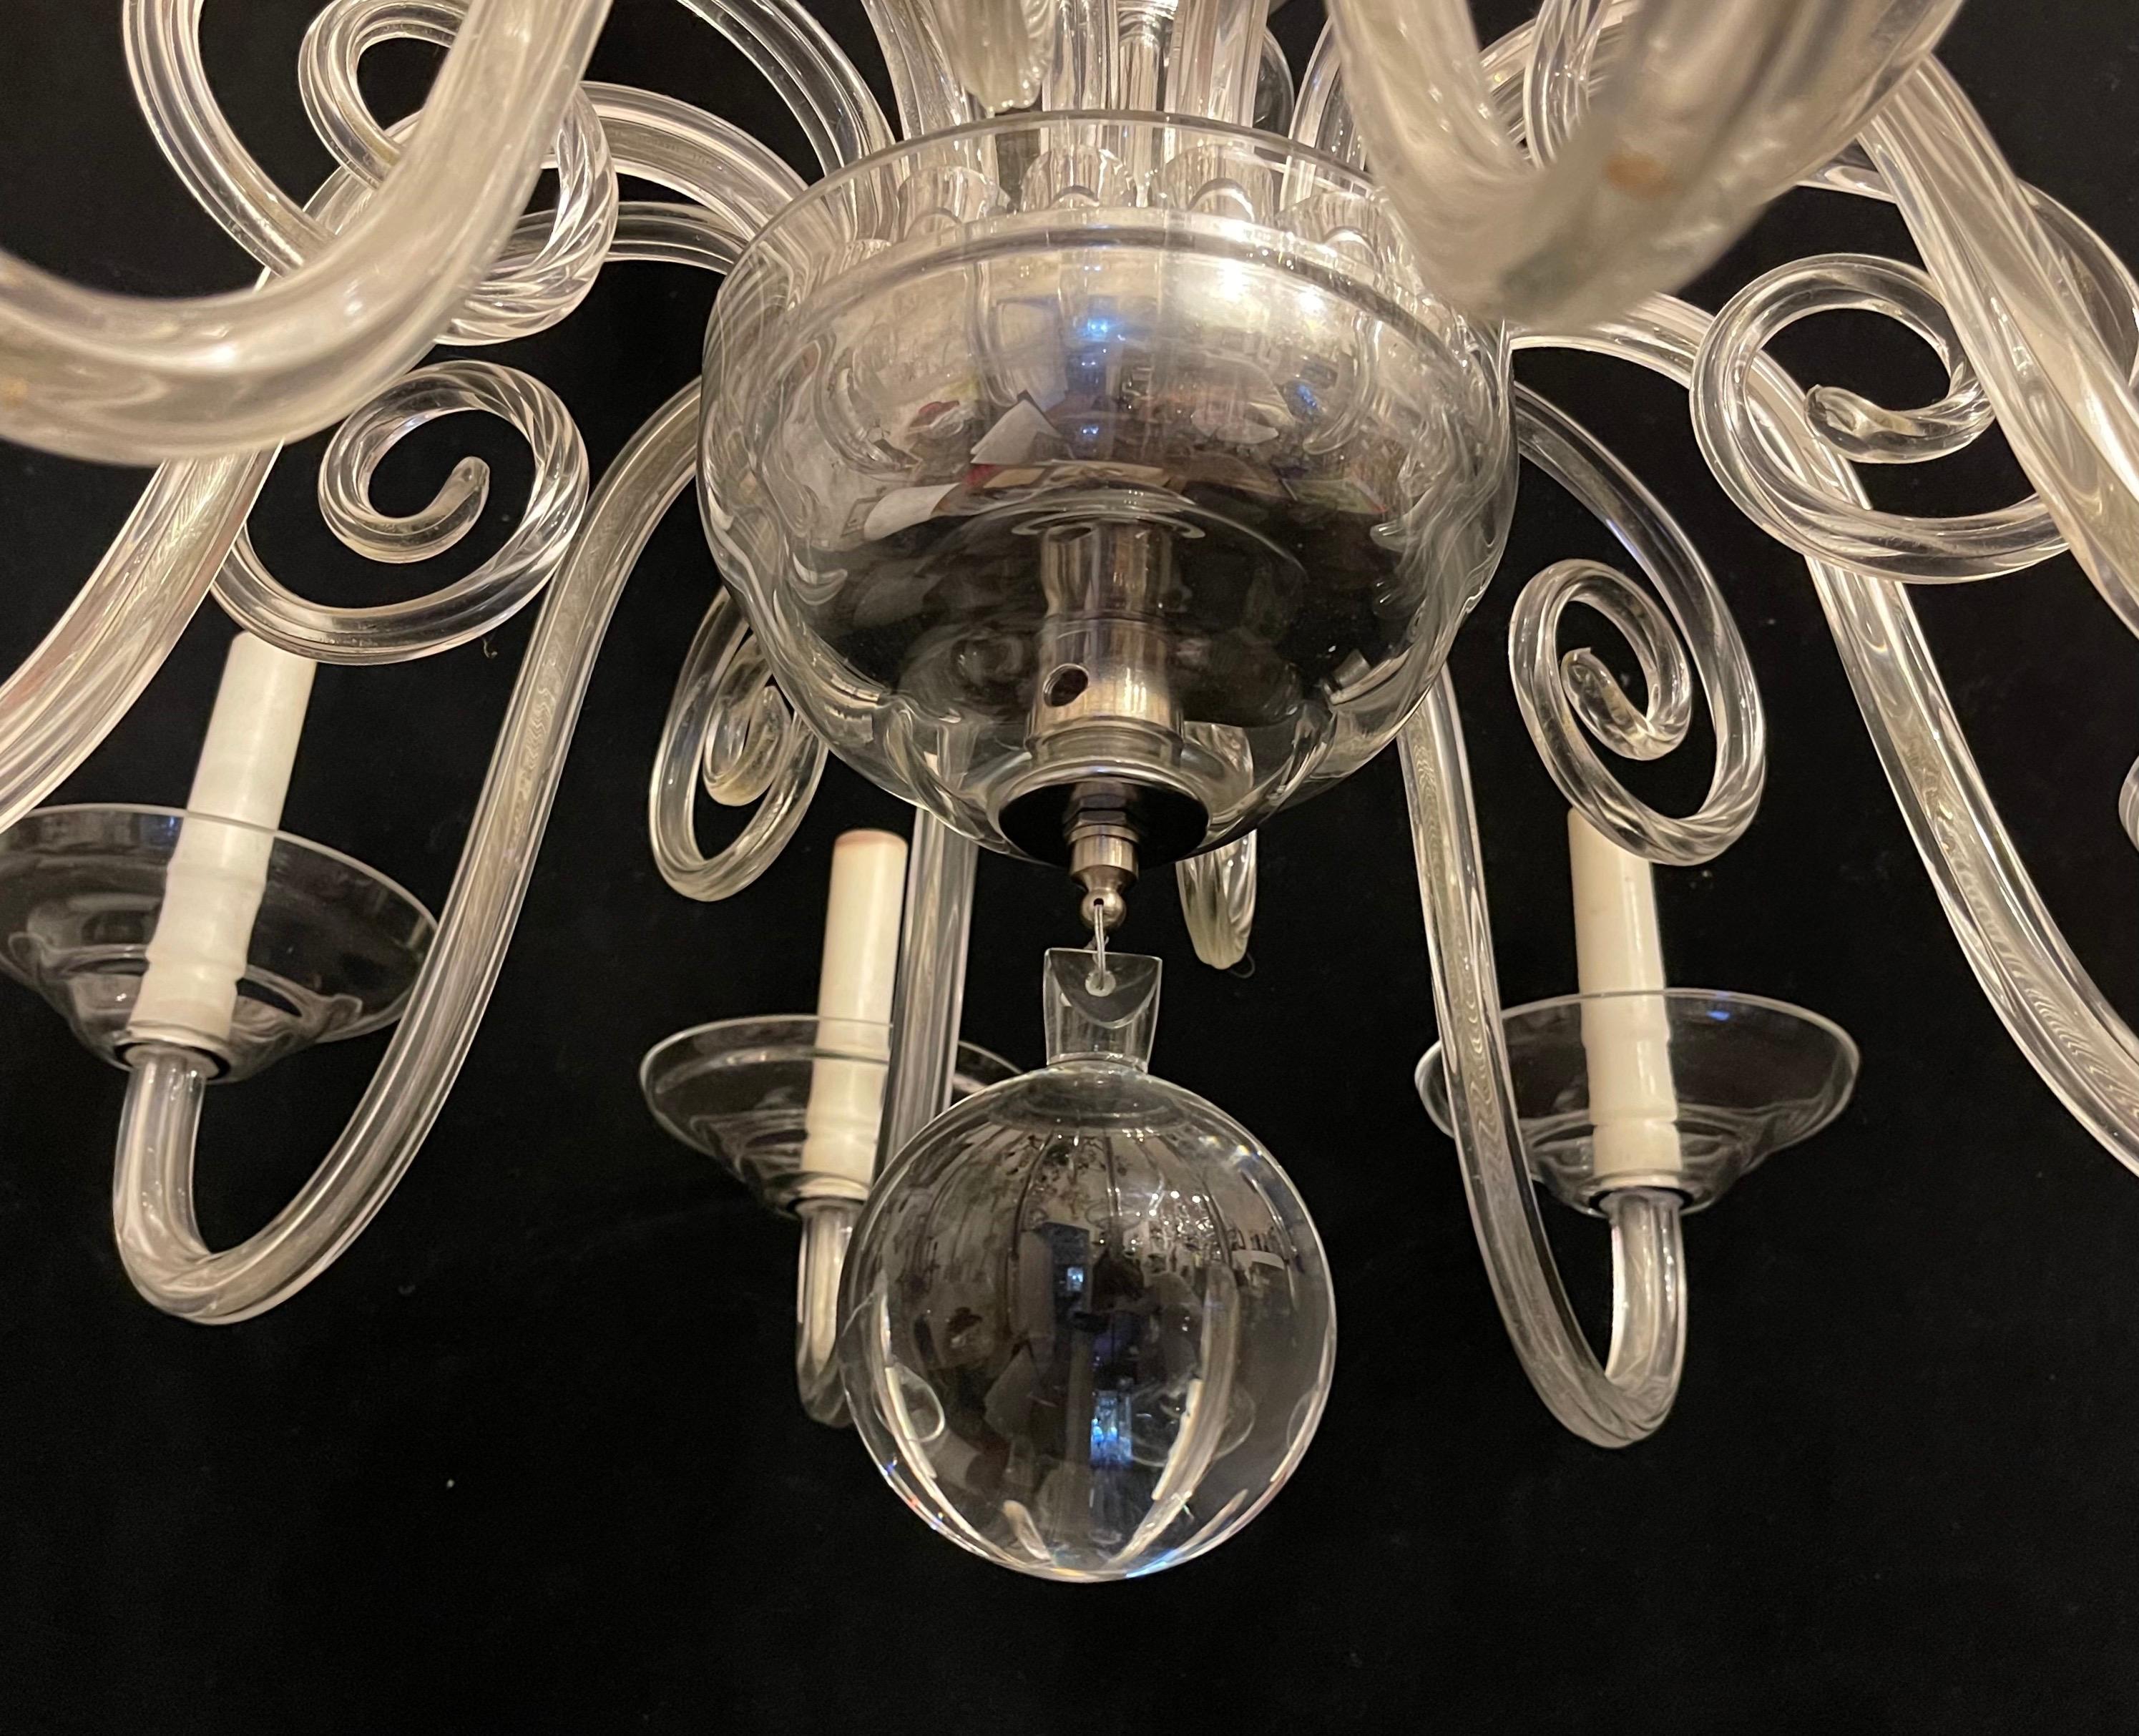 Wonderful Mid-Century Modern Crystal Glass Polished Nickel Fixture Chandelier In Good Condition For Sale In Roslyn, NY